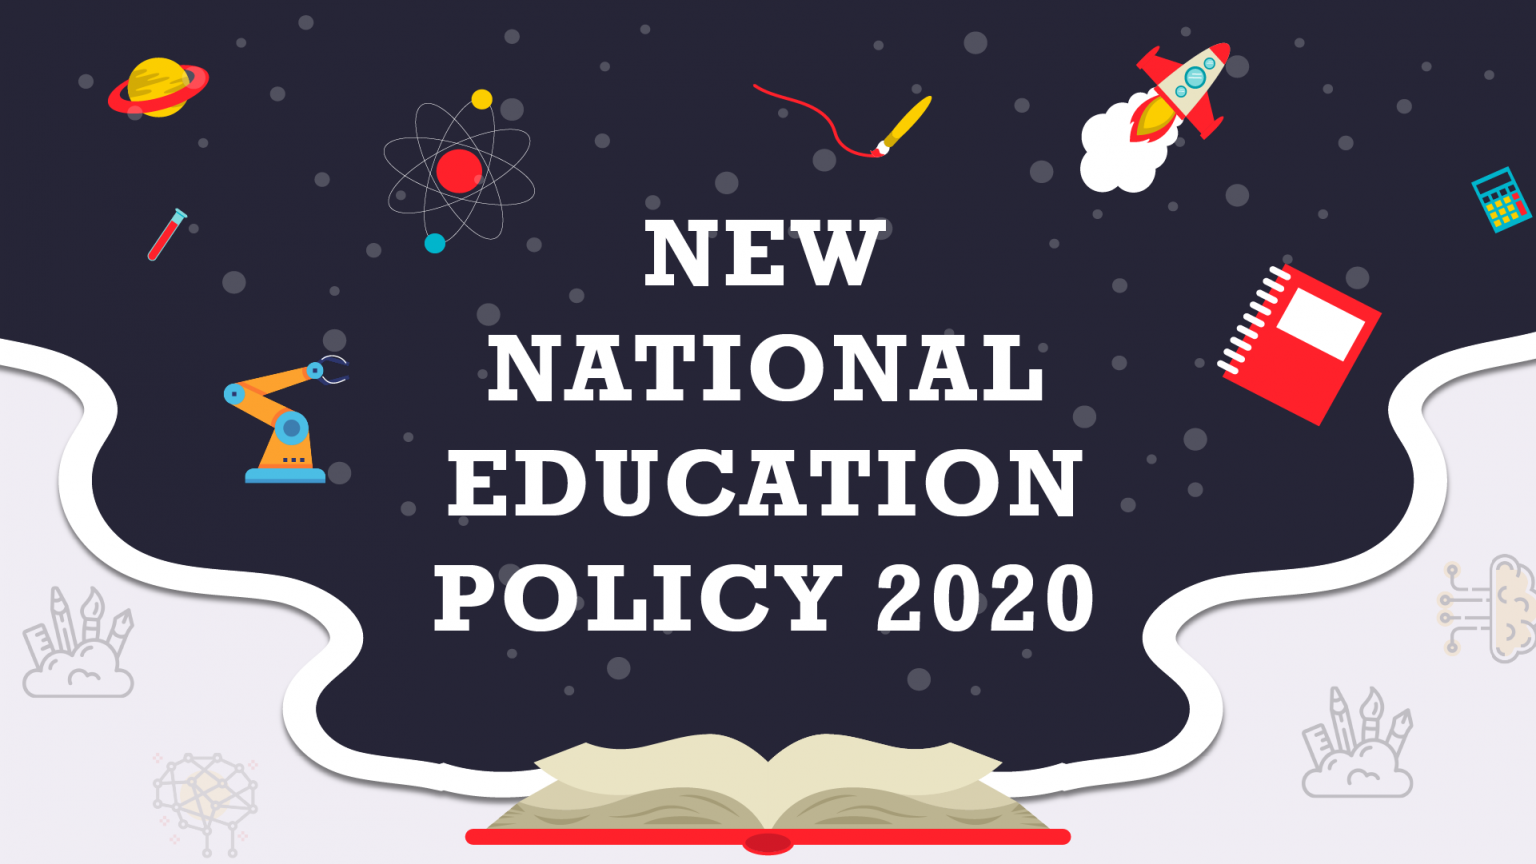 project file on new education policy 2020